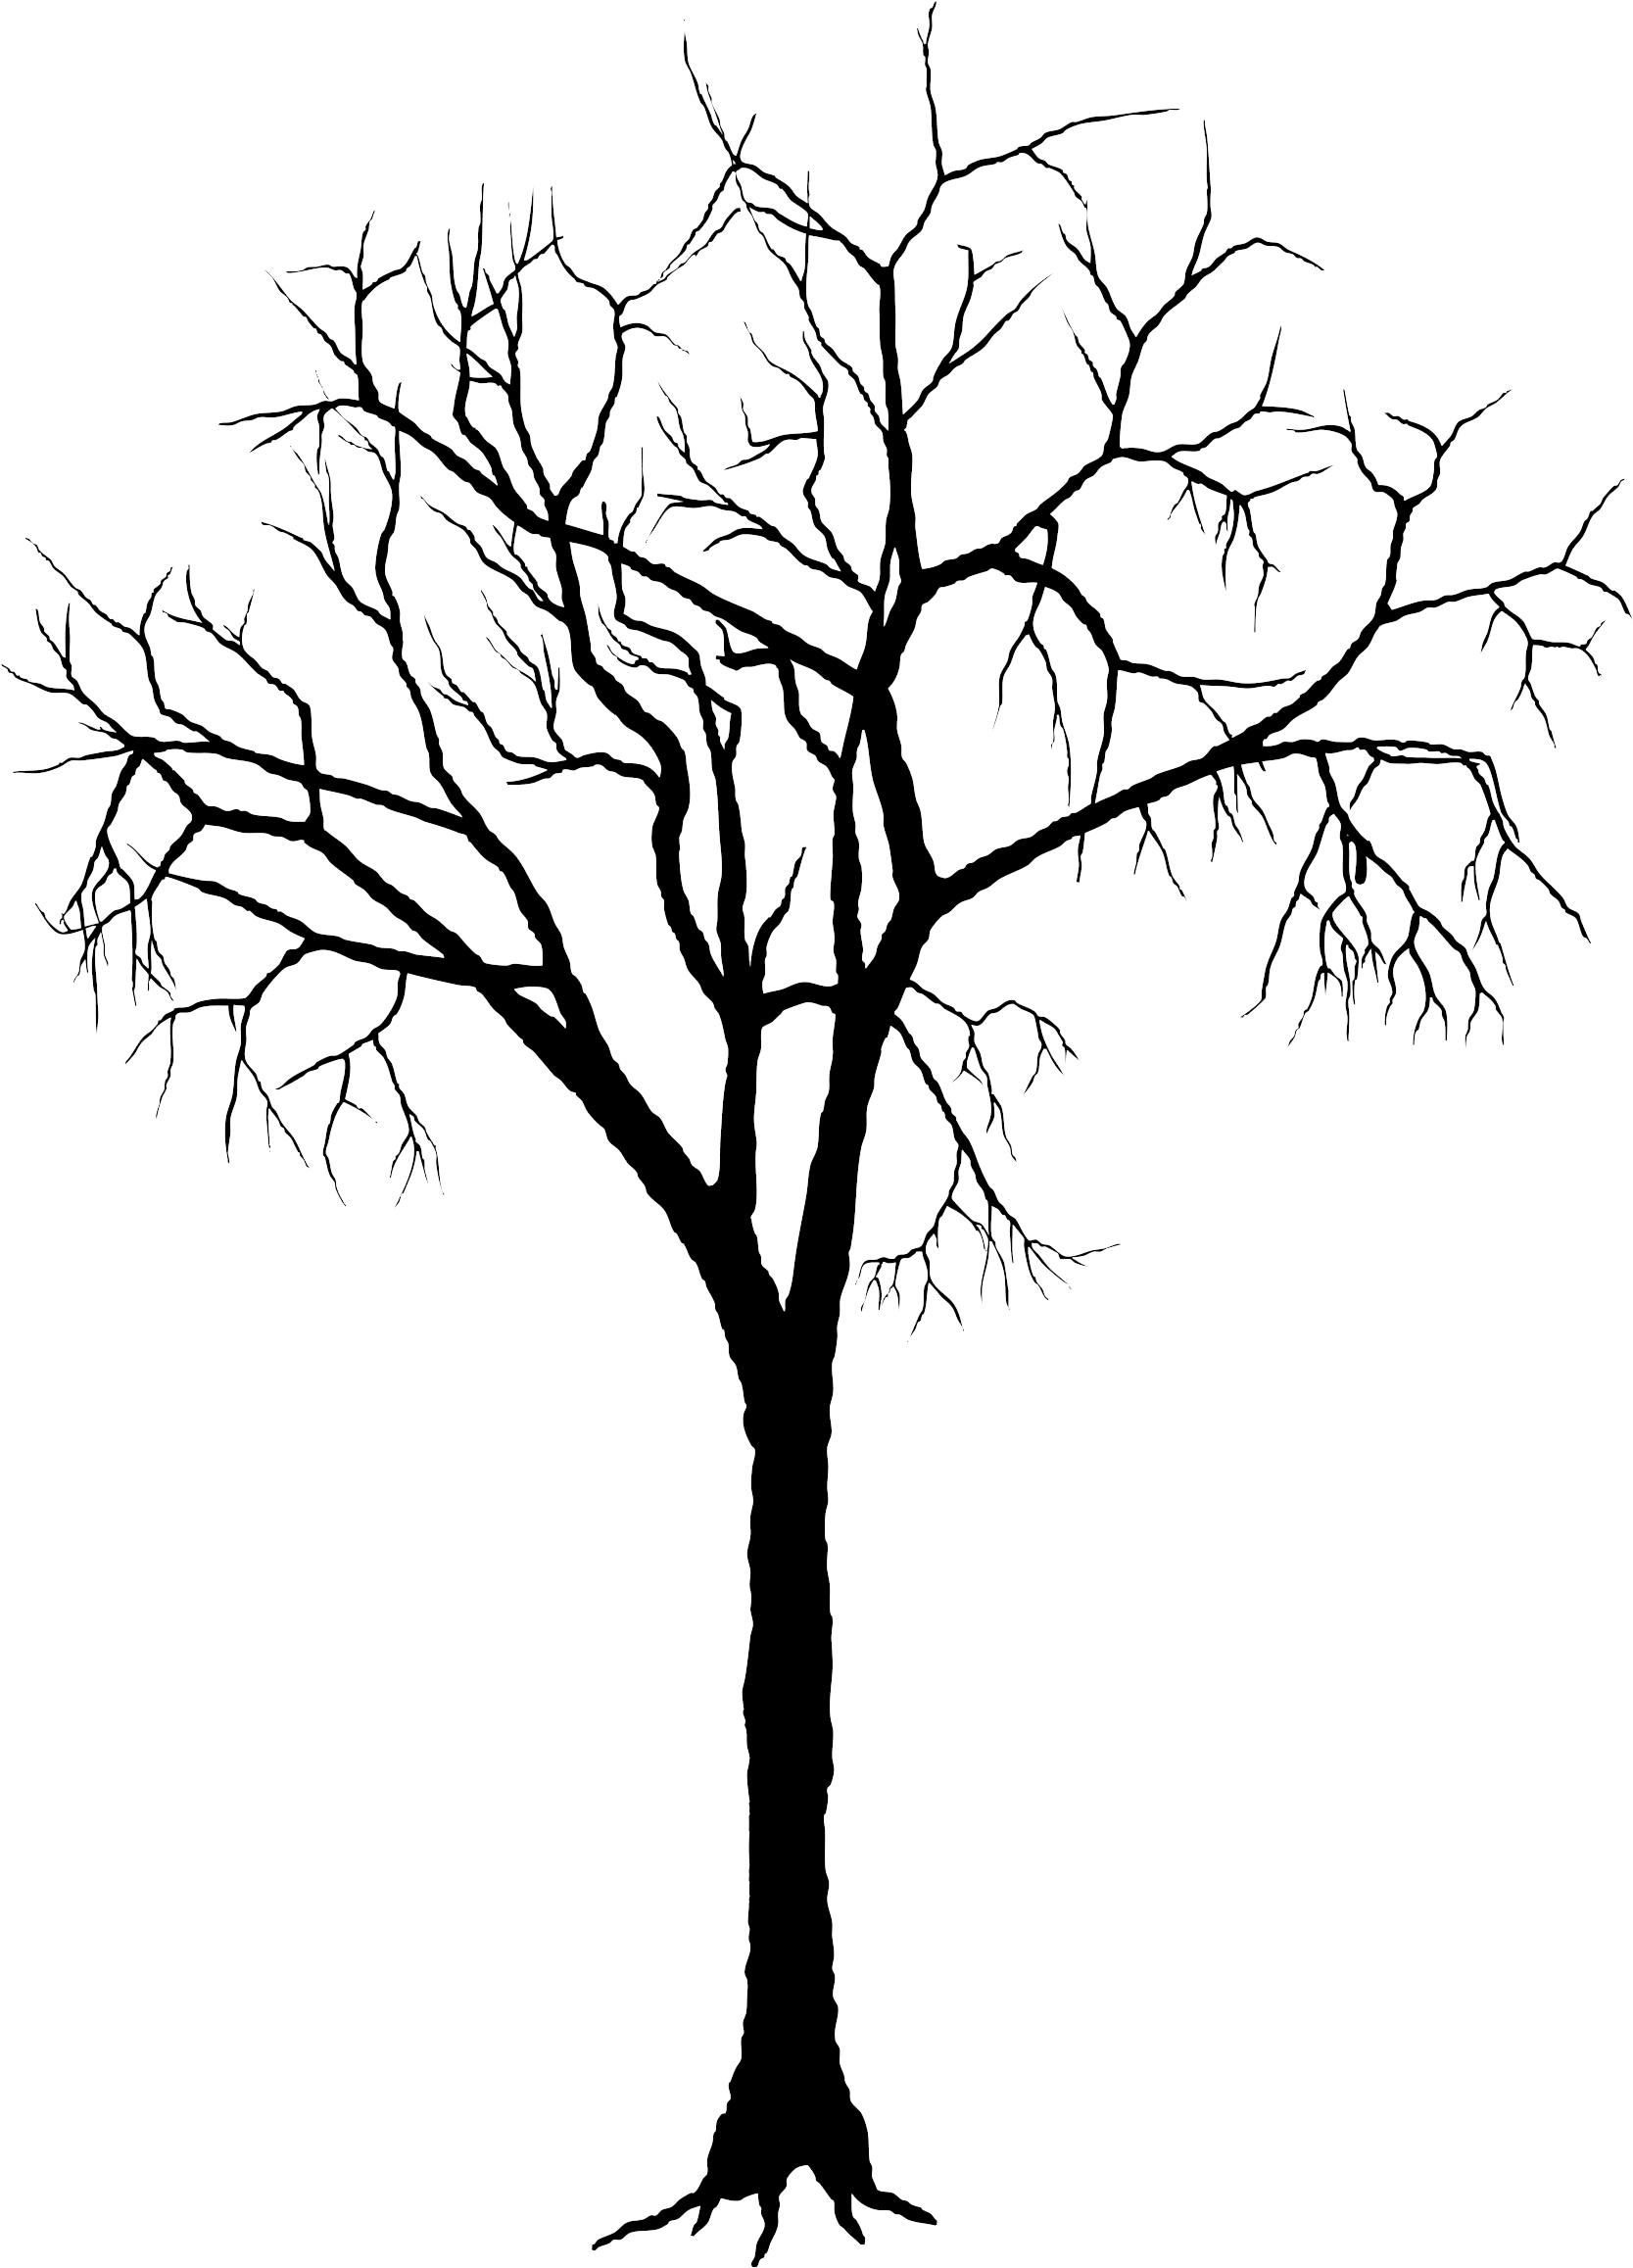 Qr0suqqx Tree Branches - Dead Tree Silhouette Png (1771x2400)